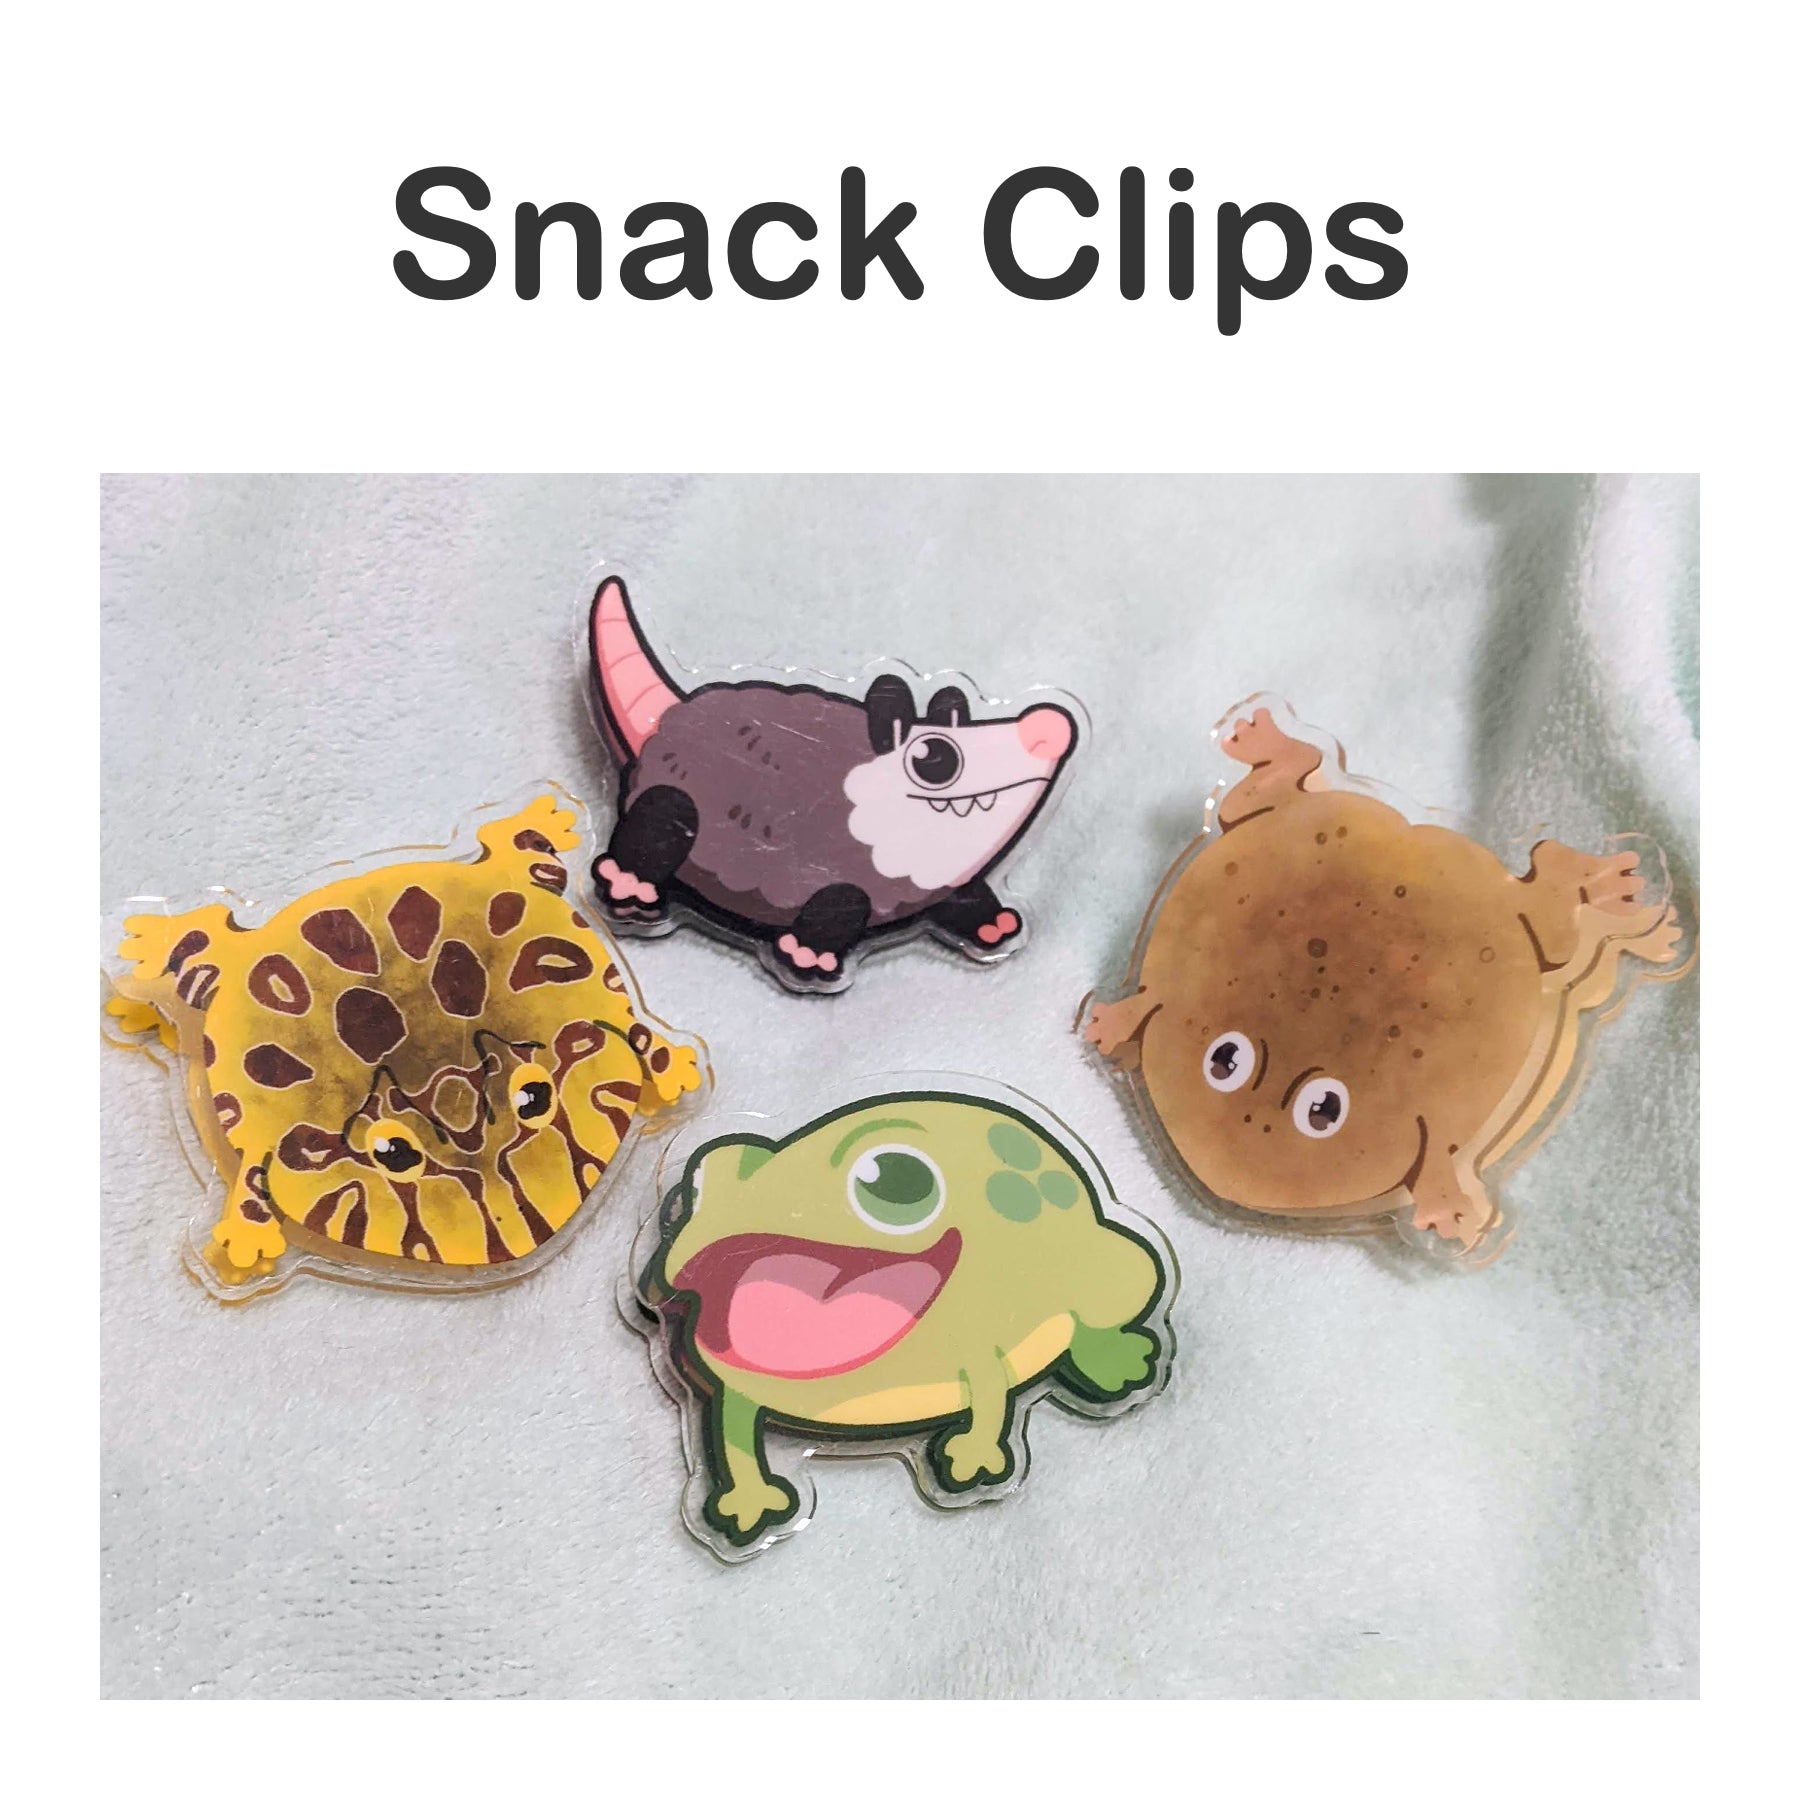 Snack Clips